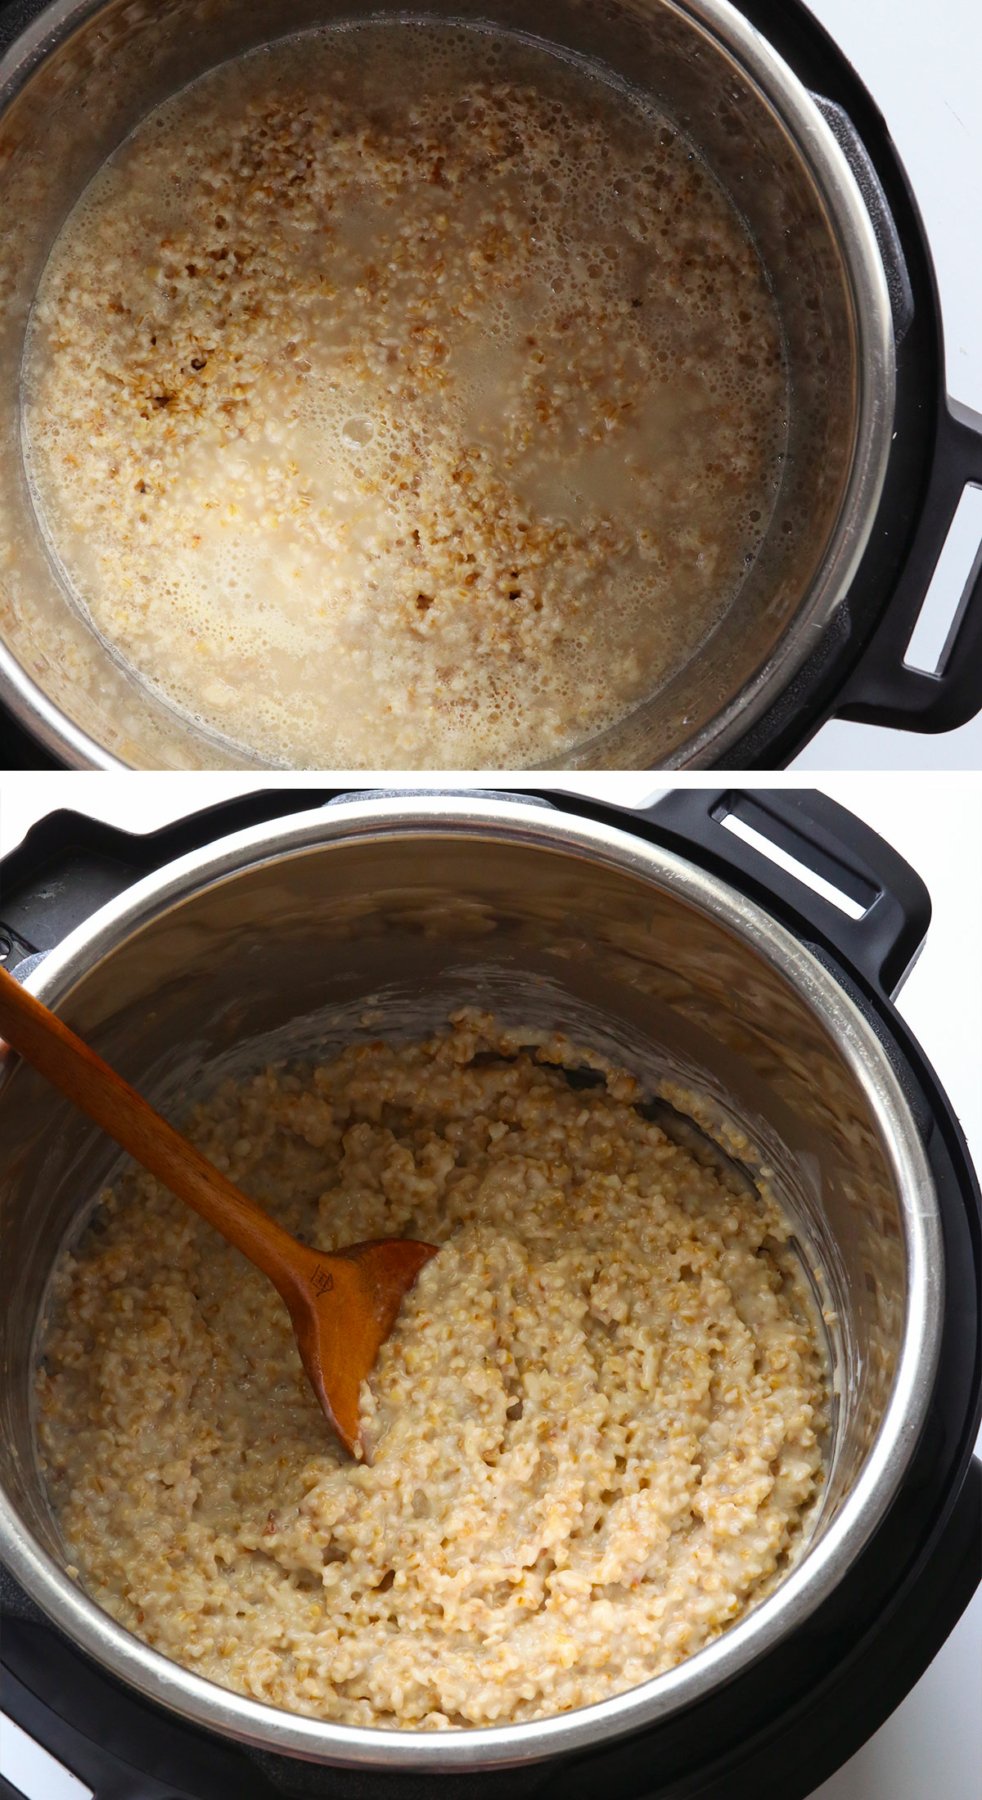 steel cut oats after cooking in the Instant pot and stirred with a spoon.